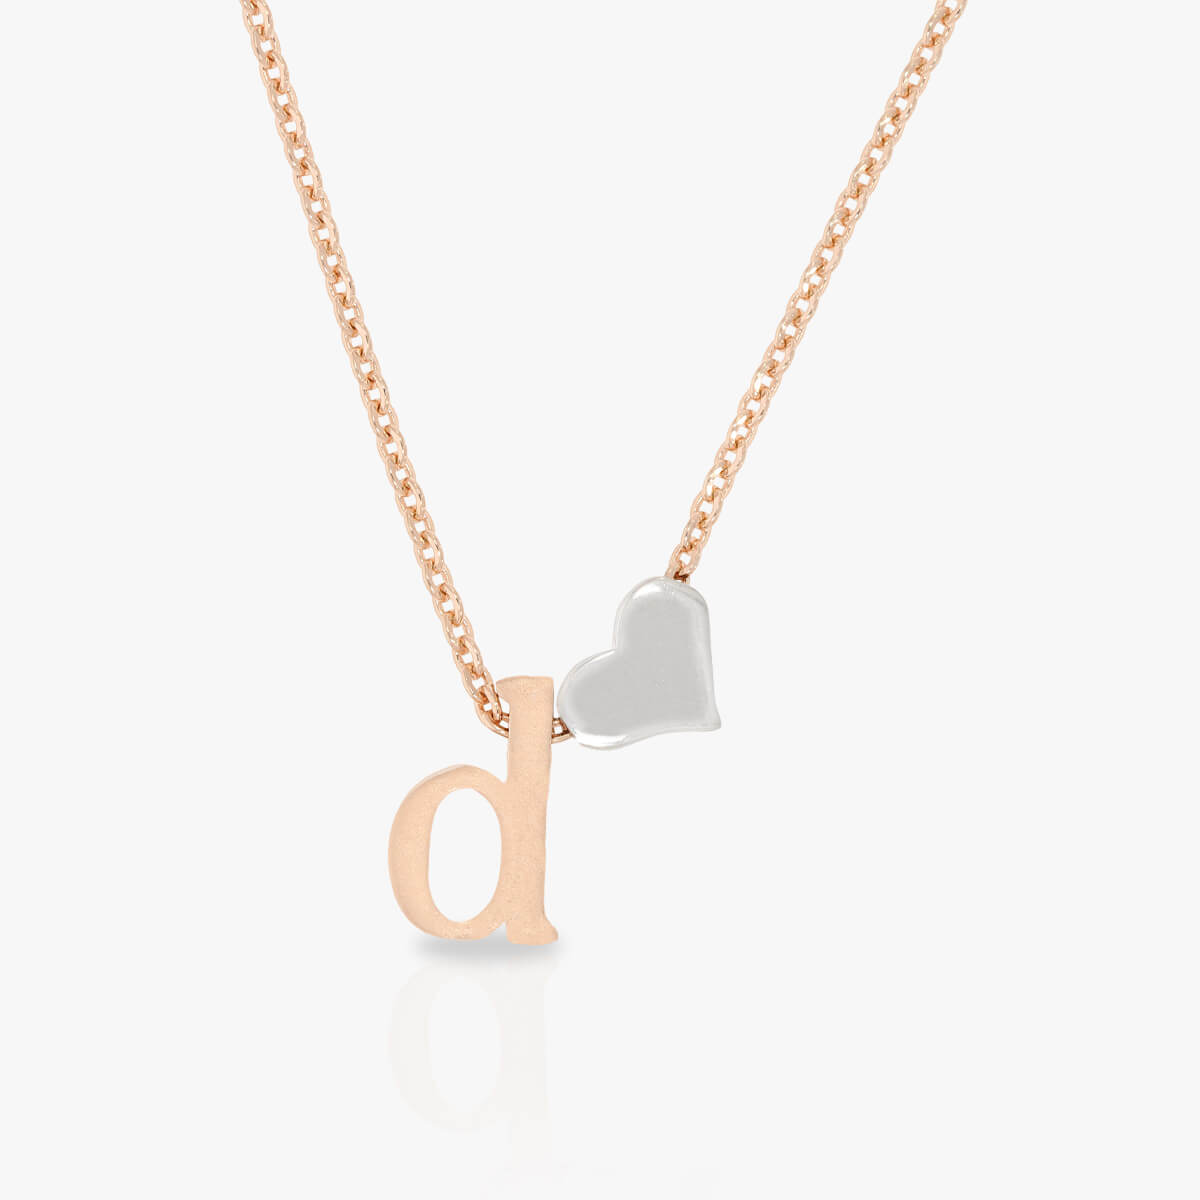 Sterling Silver "D" Initial Necklace